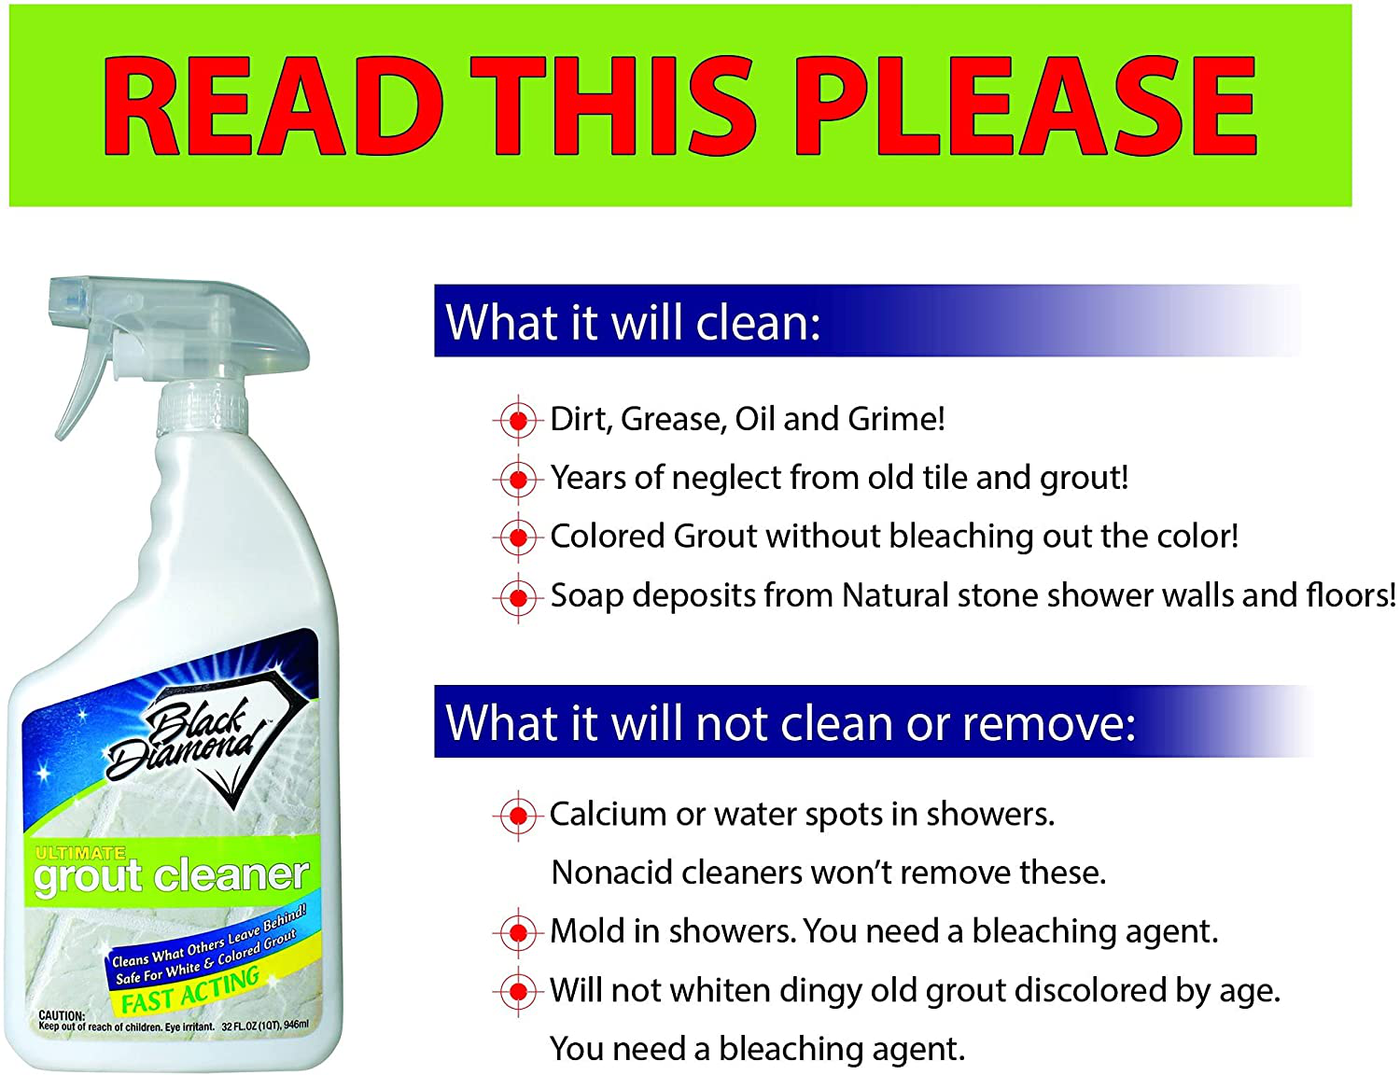 Ultimate Grout Cleaner: Best Cleaner for Tile,Ceramic,Porcelain, Marble Acid-Free Safe Deep Cleaner & Stain Remover for Even The Dirtiest Grout. (1-Quart)